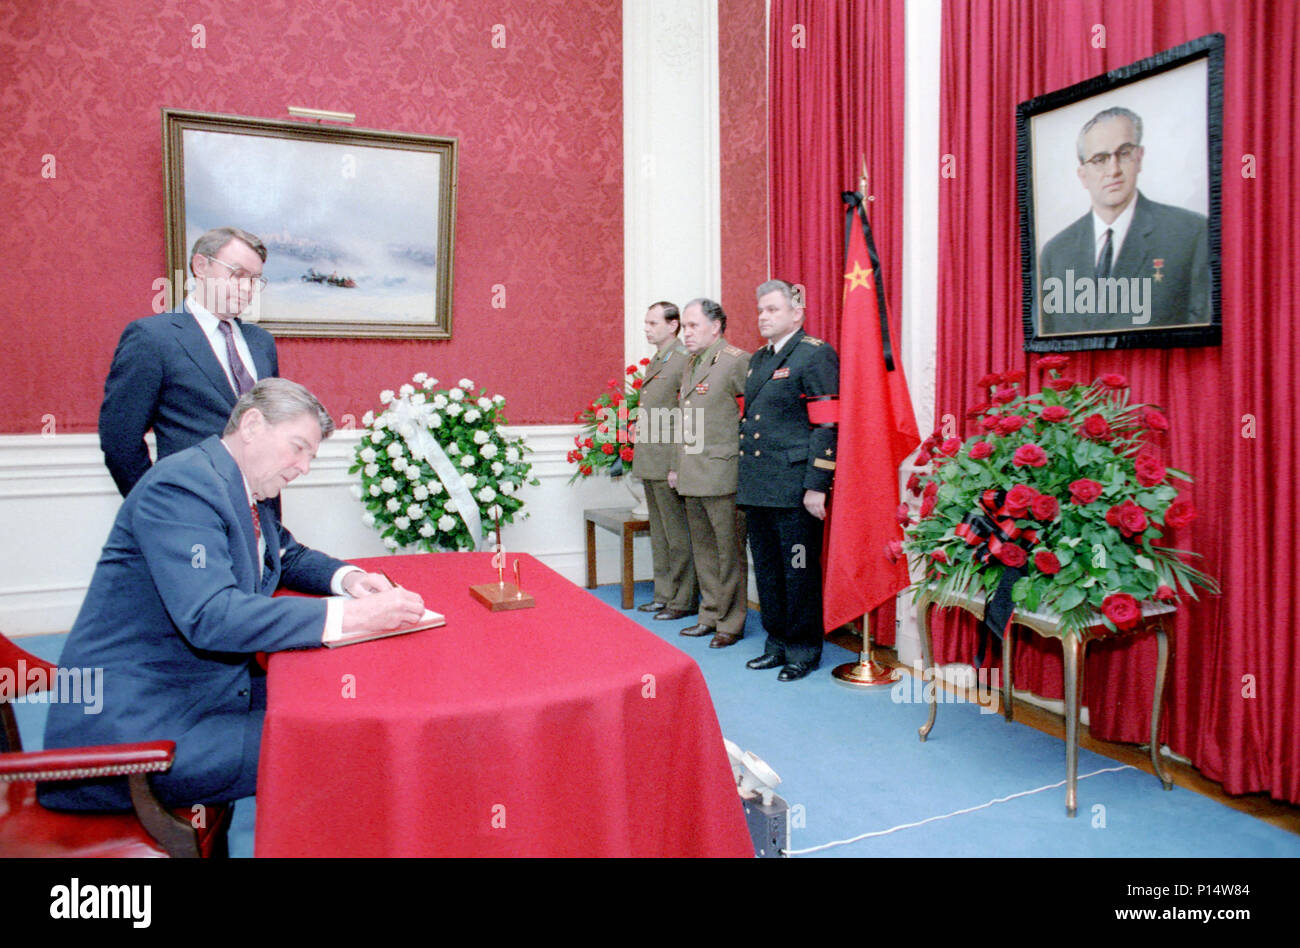 2/13/1984 President Reagan signing Condolence book on death of Chairman of USSR Yuriy Andropov at the Soviet Embassy Stock Photo